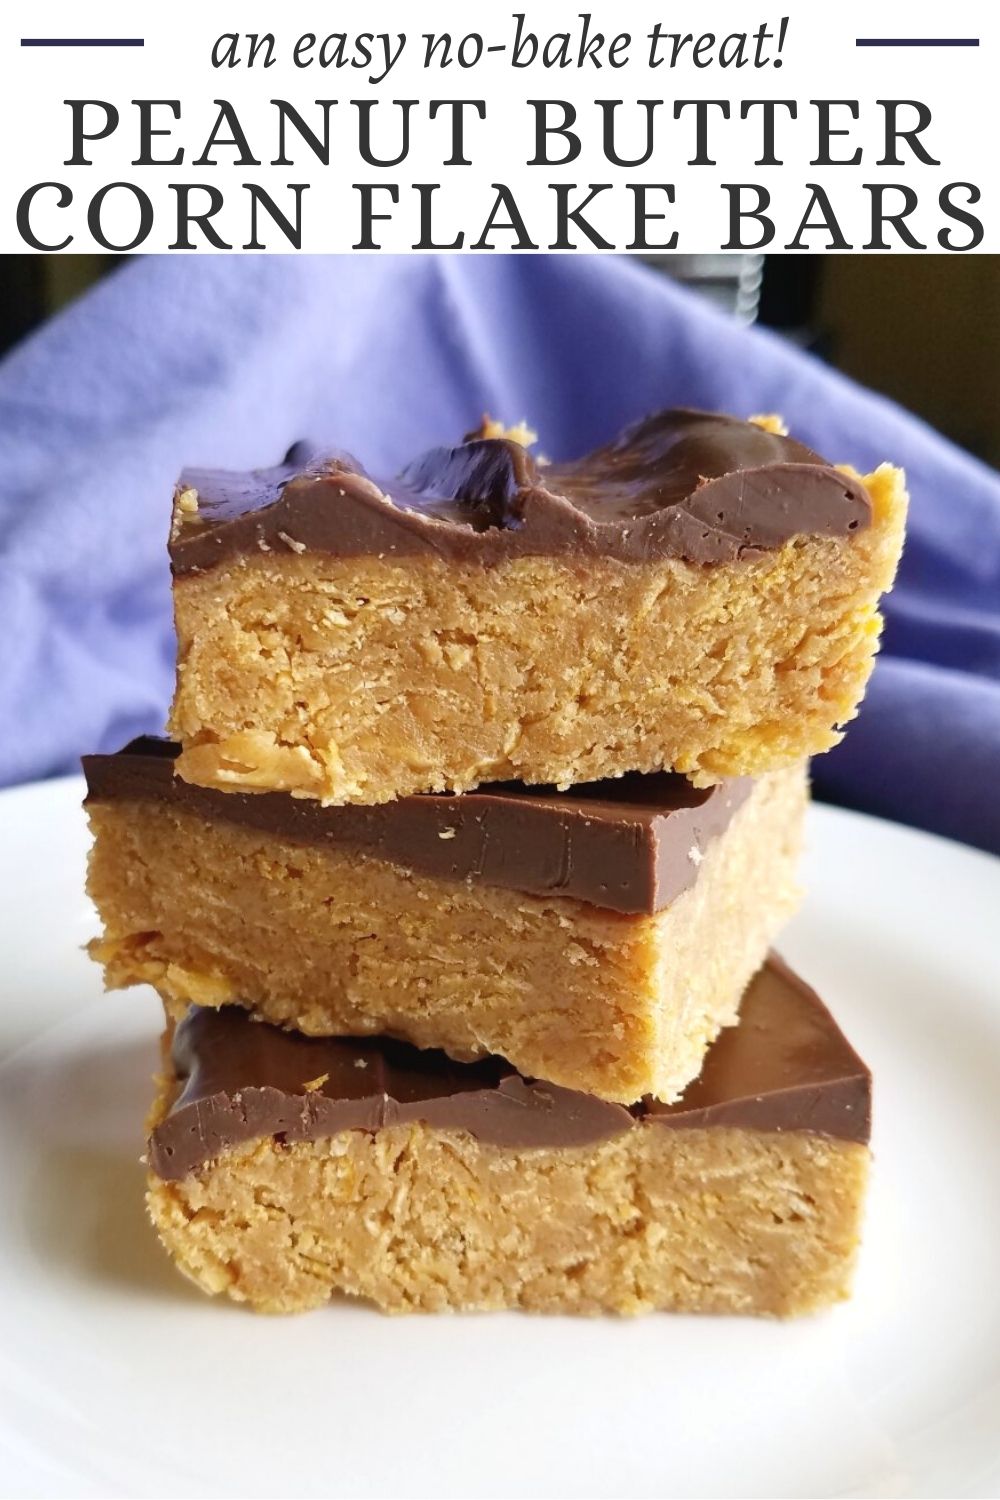 If a quick and easy no-bake chocolate peanut butter treat is what you need, these cornflake bars are just the thing. They are the perfect mix of crunchy, chewy and delicious.